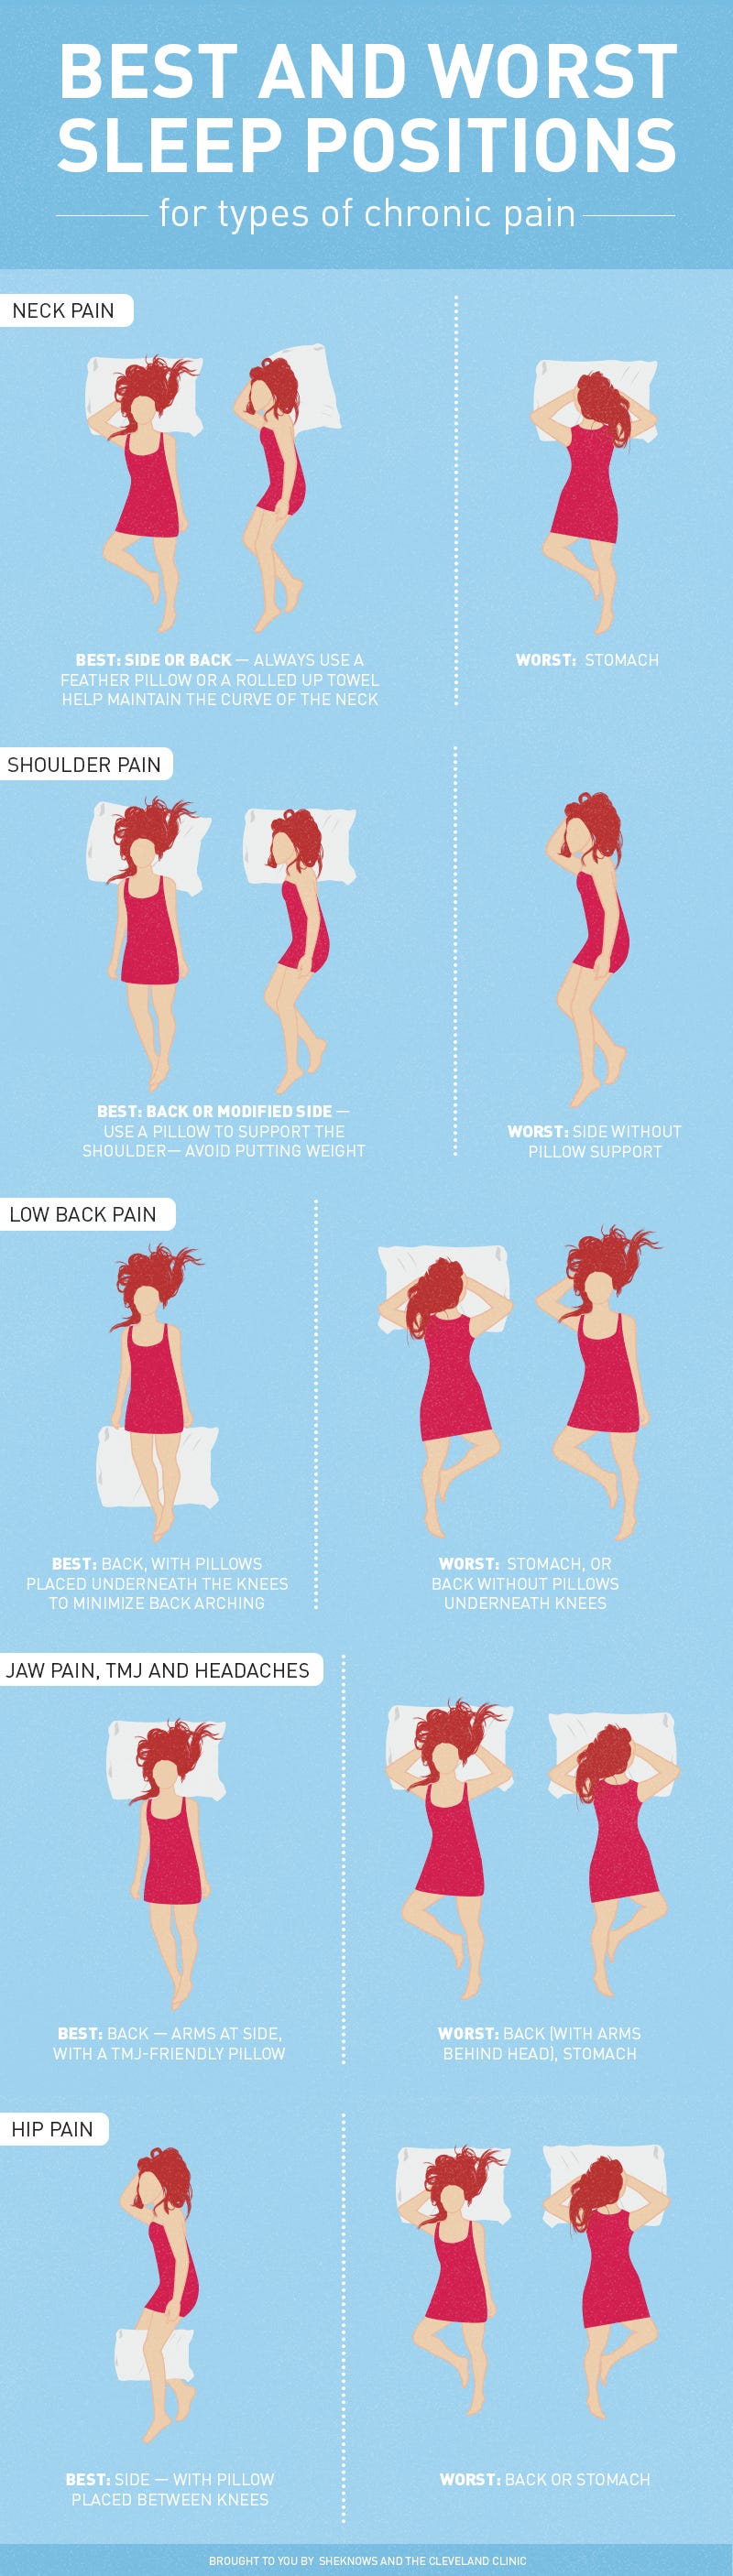 A Guide to Better Sleep With Hip Pain